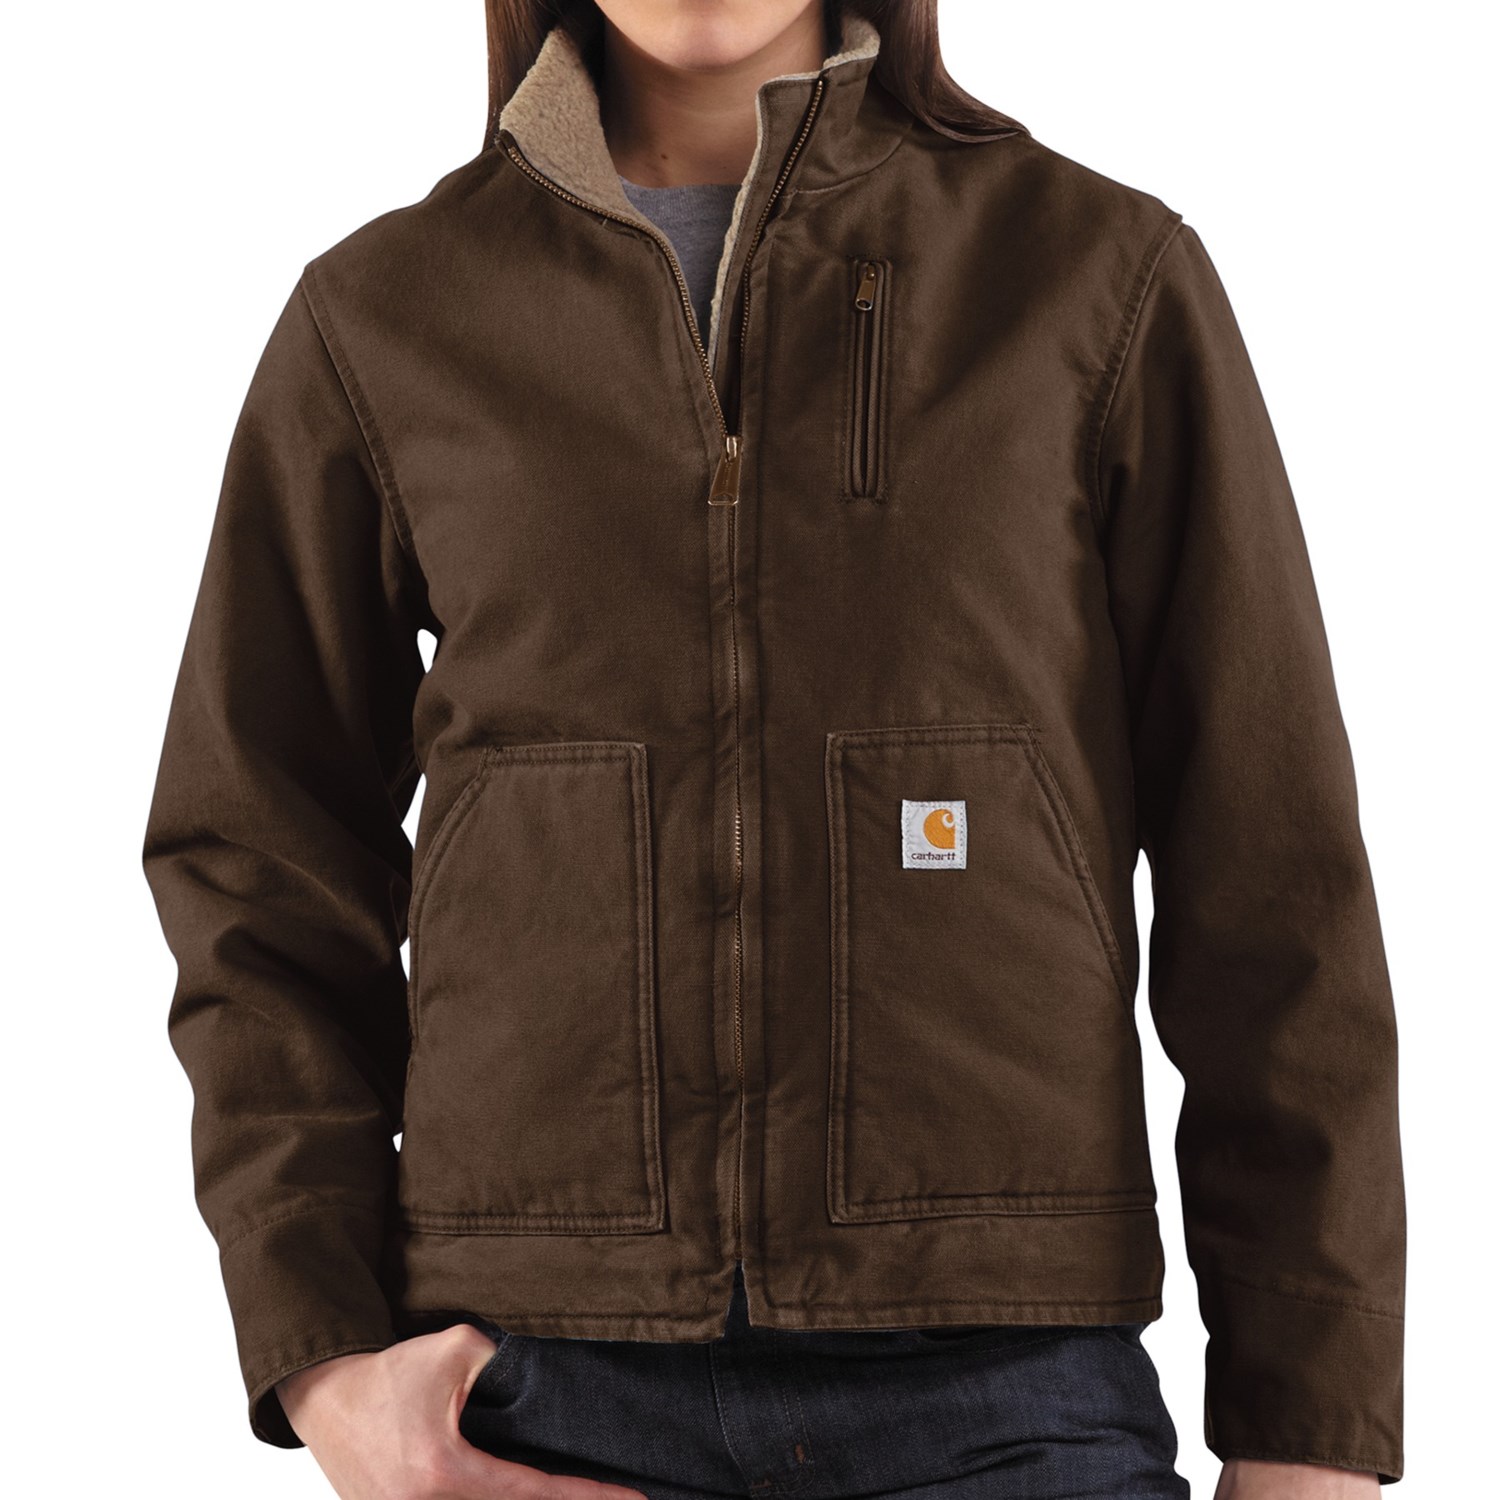 Carhartt Canyon Sandstone Jacket - Sherpa Lined (For Women)